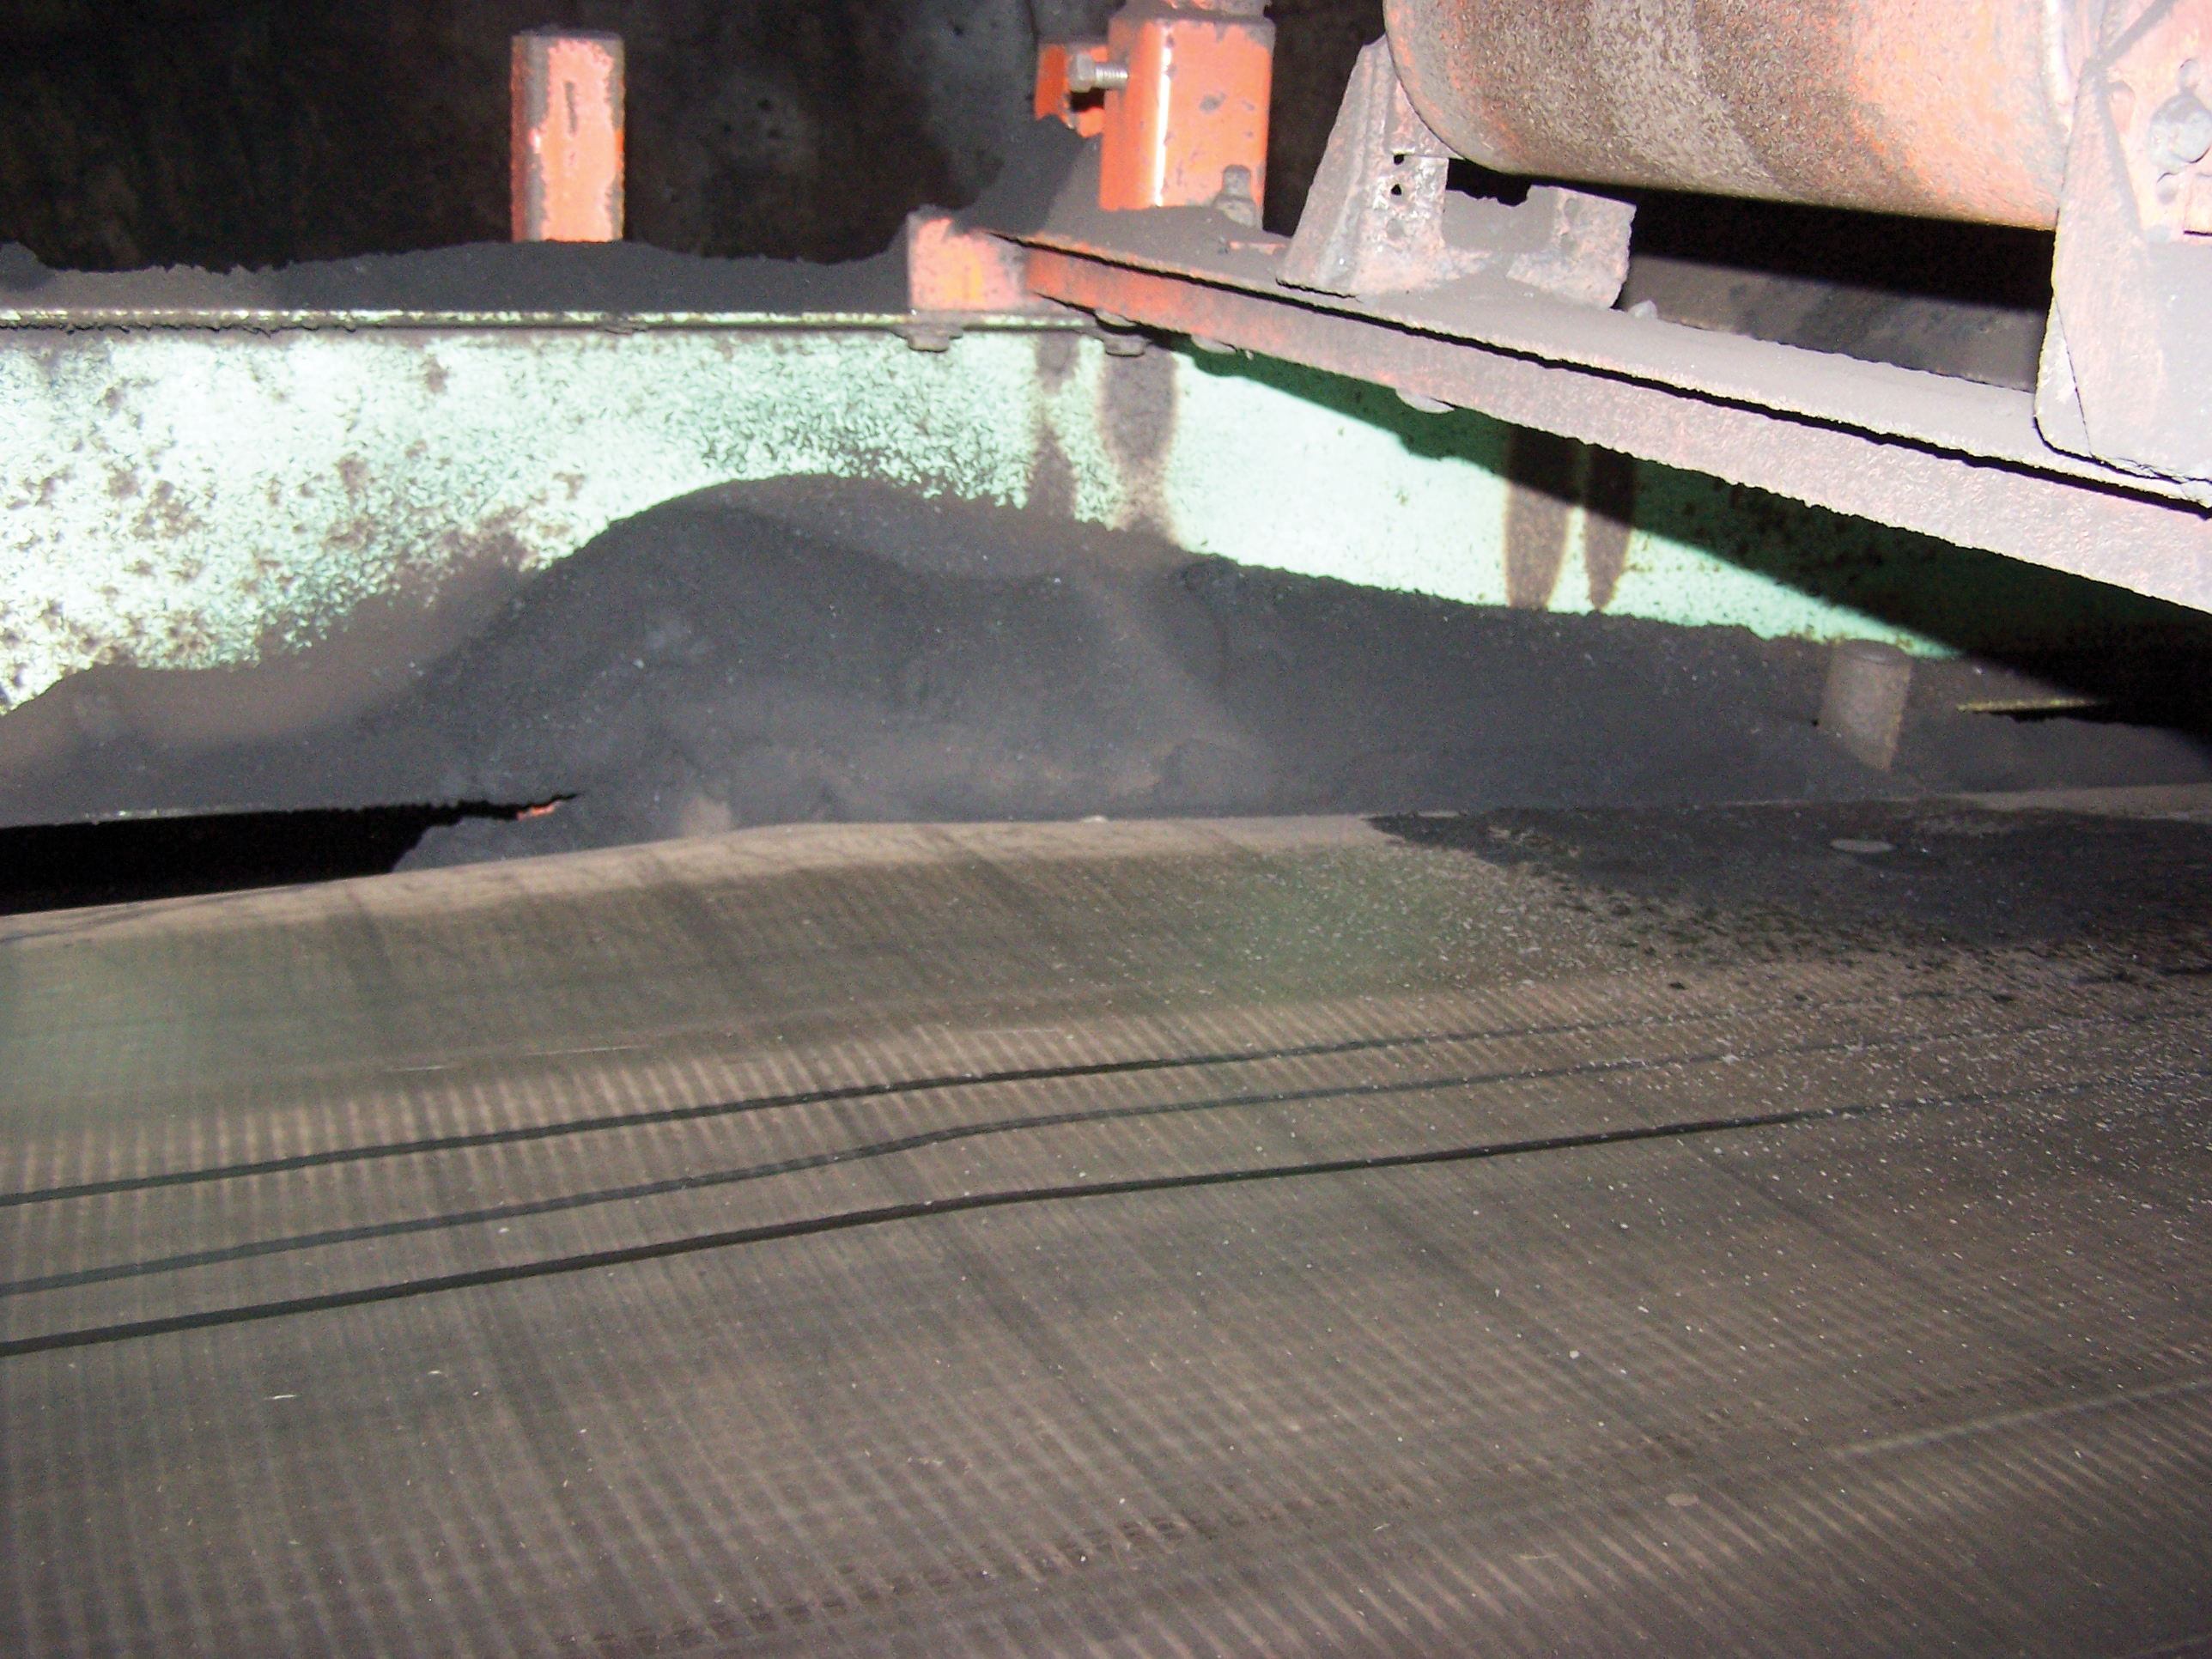 Conveyor belt surface damage caused by belt cleaner chatter.